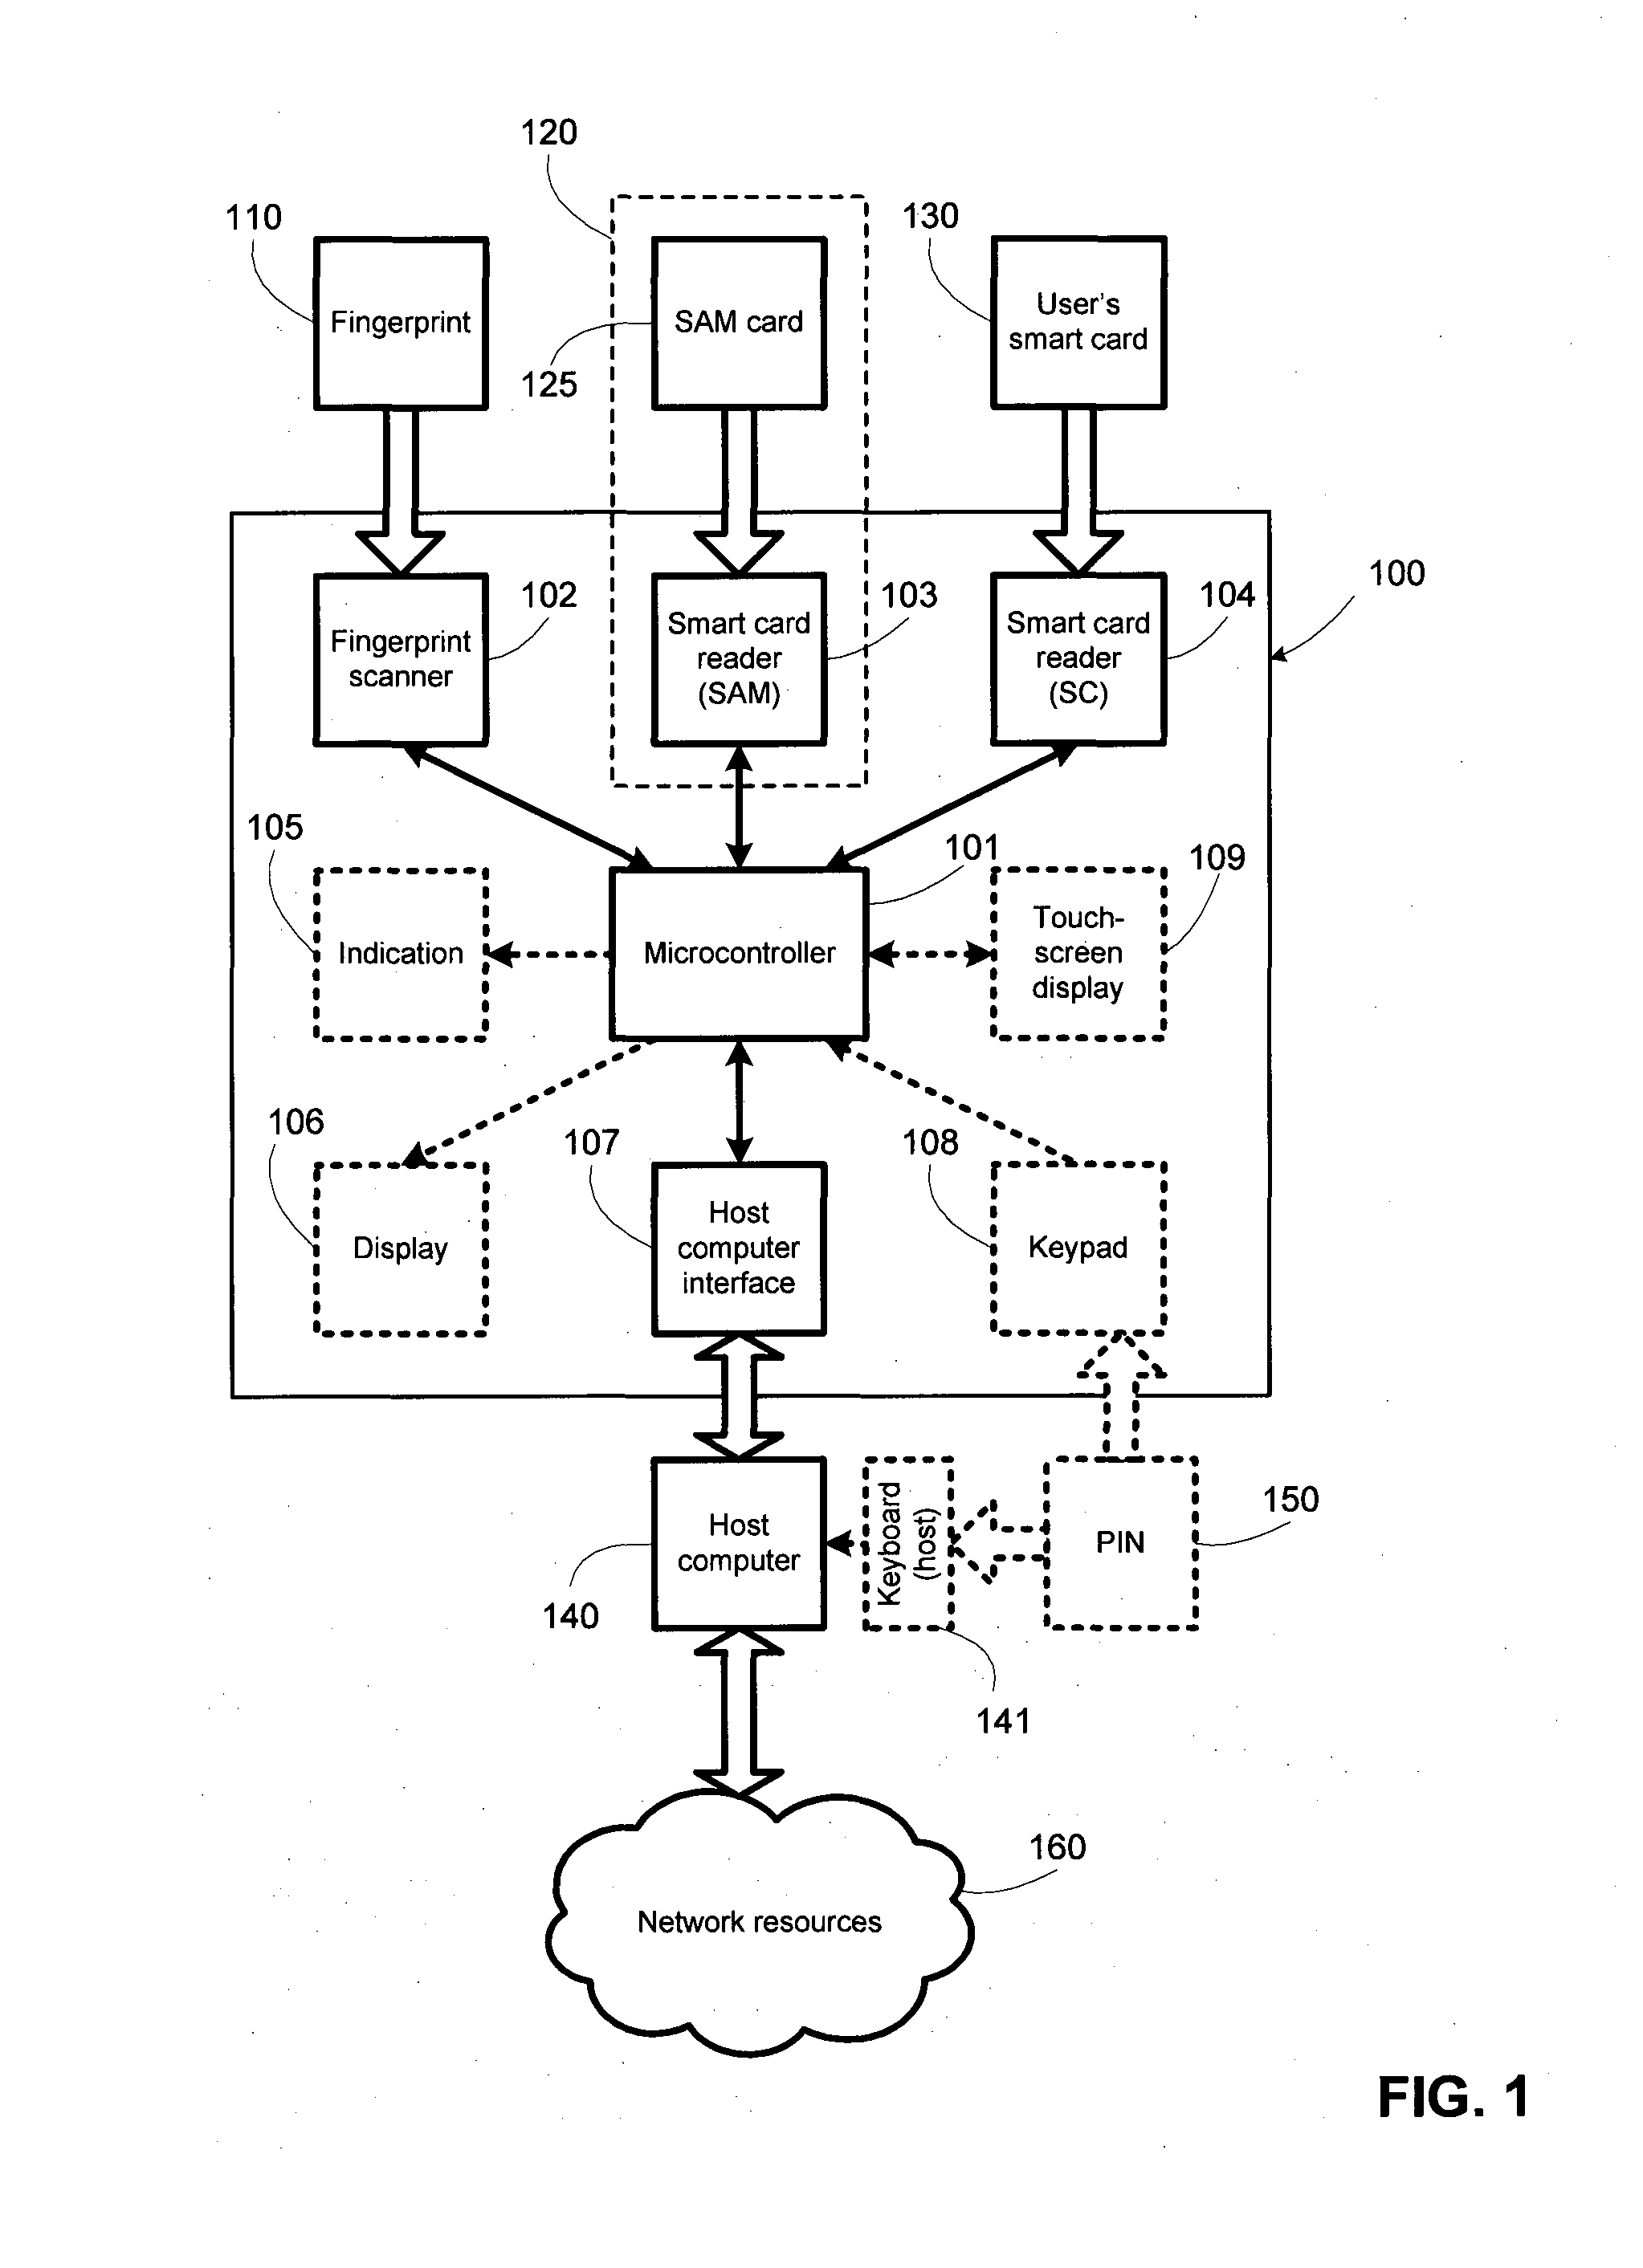 System and method for high security biometric access control